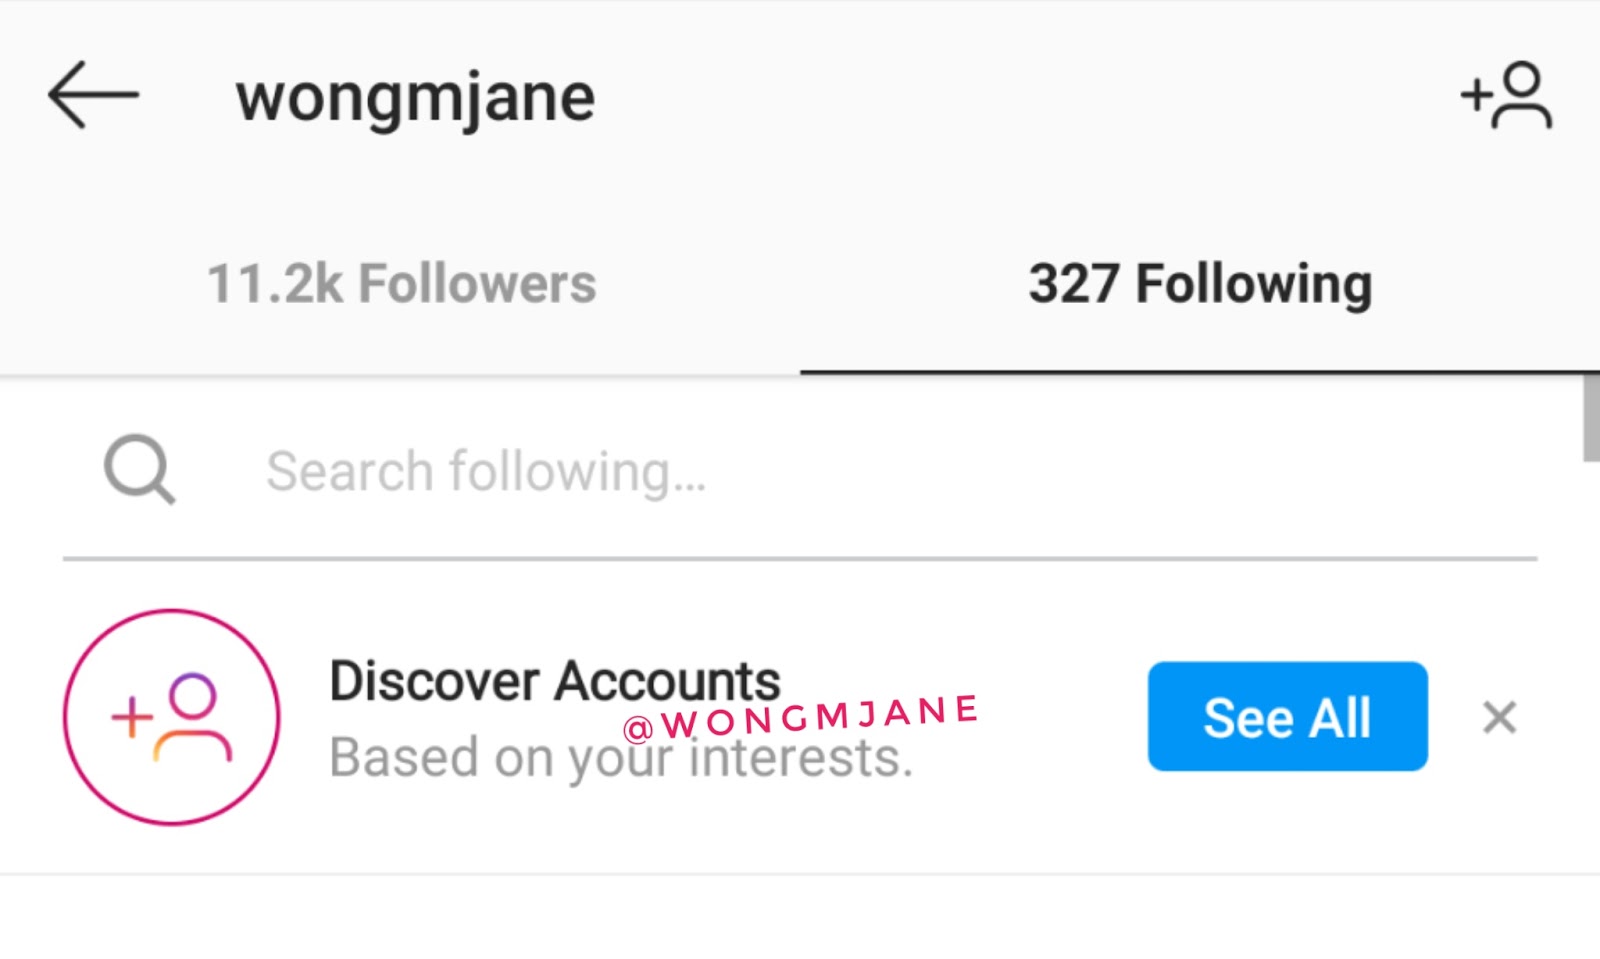 Instagram’s updated "Discover Accounts" feature aims to connect users to creators and brands based on their interests